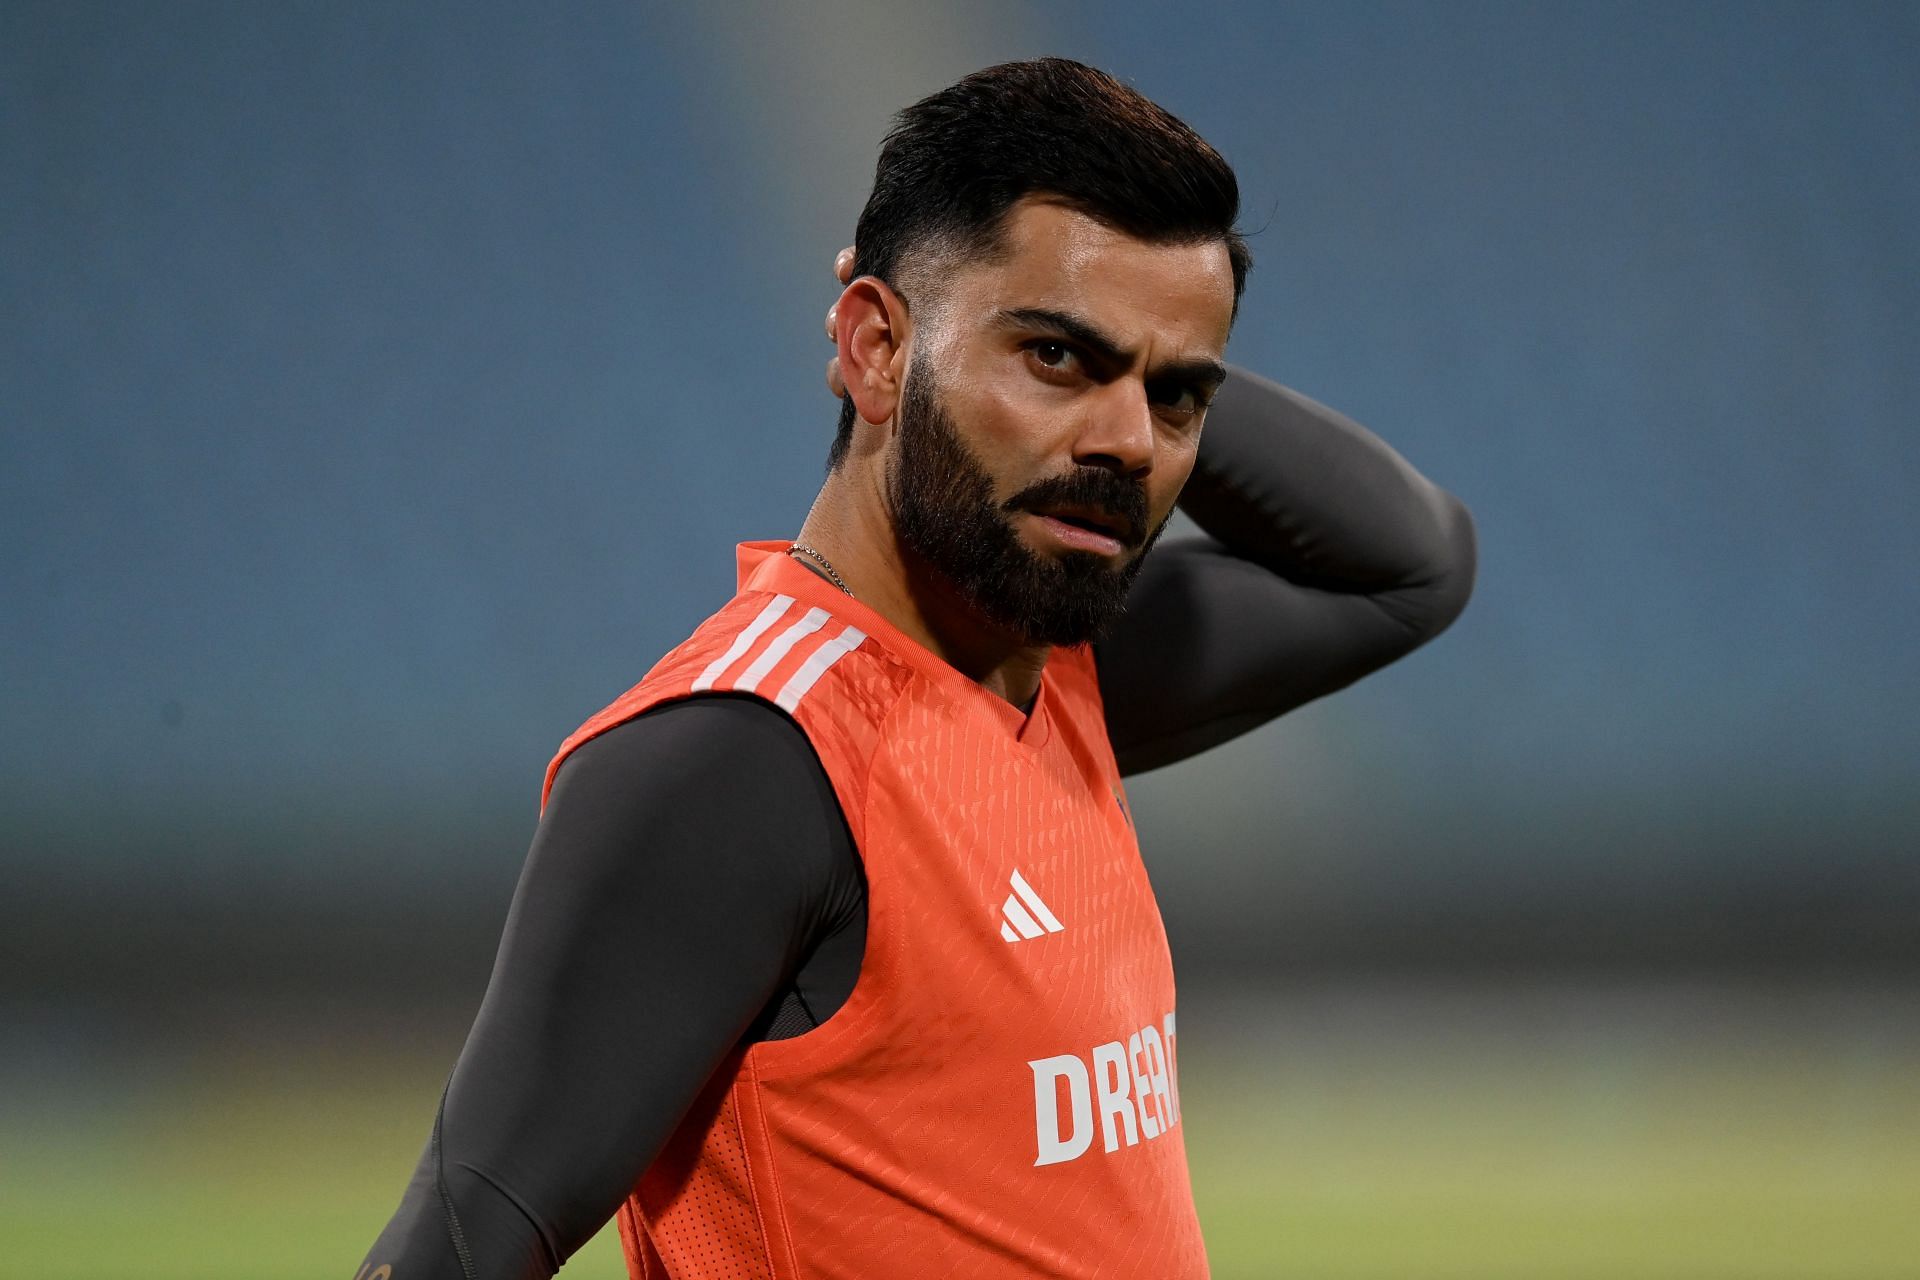 Virat Kohli has been short on game time this year due to personal reasons.